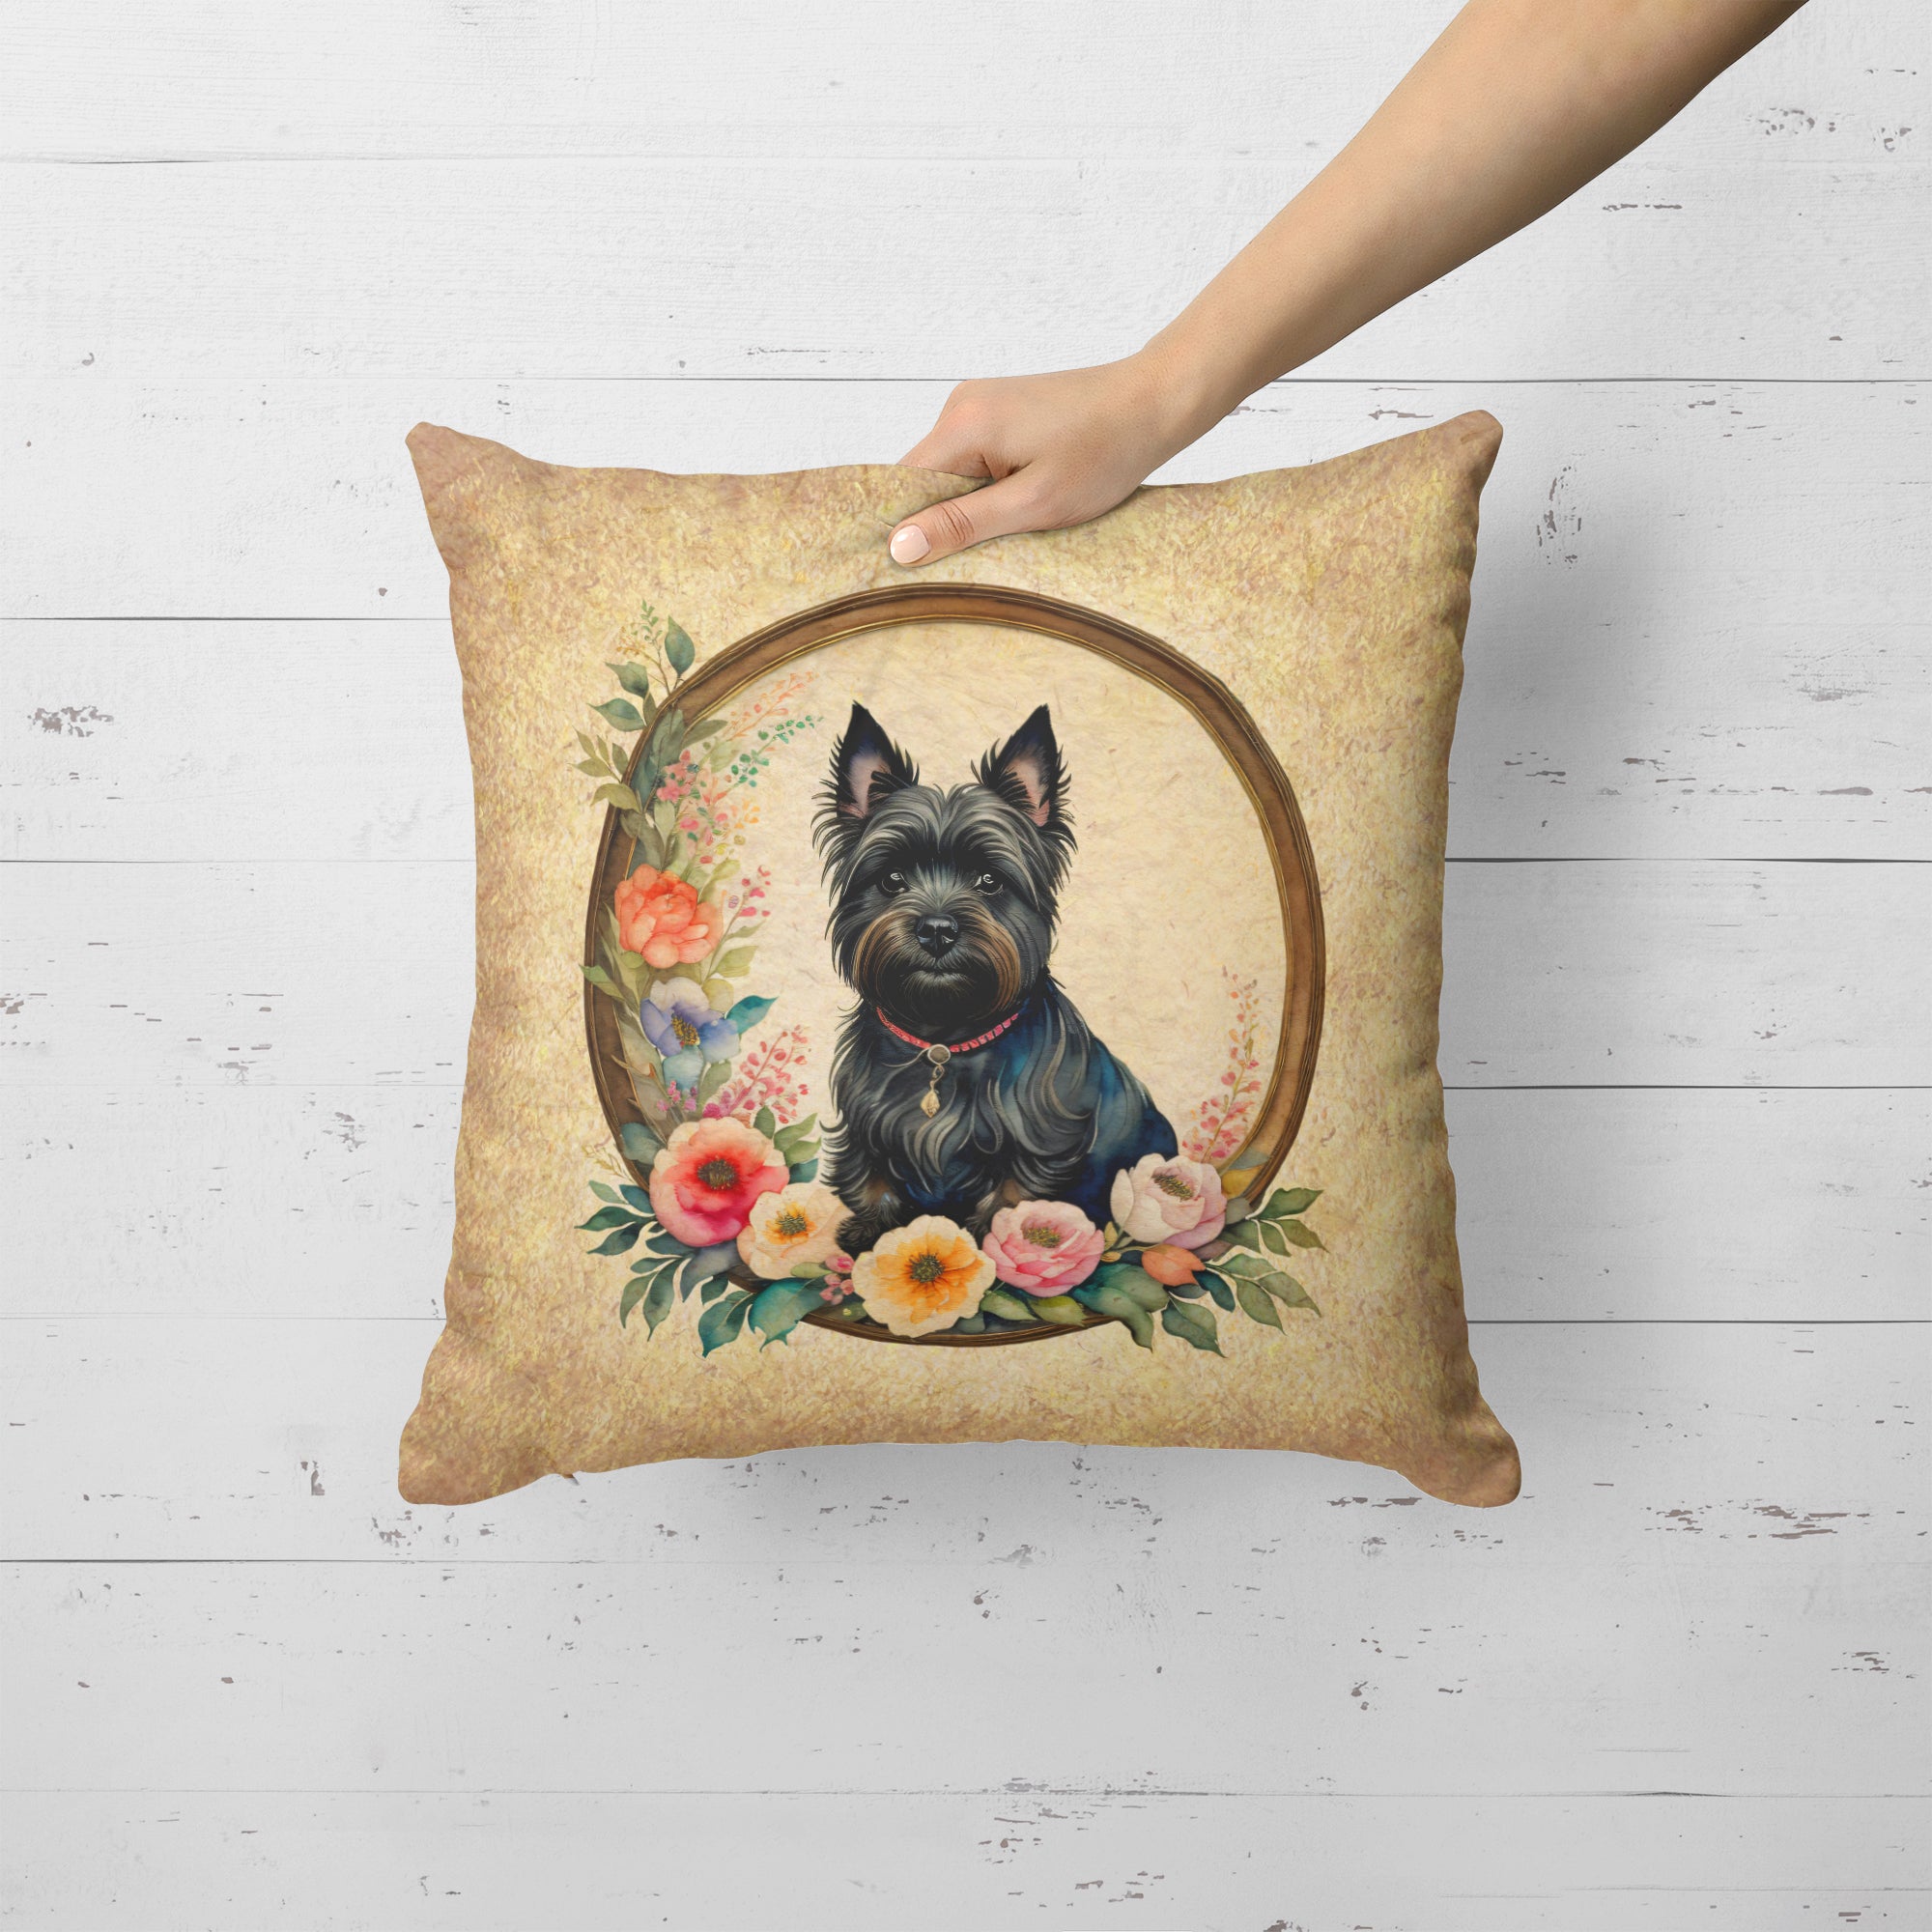 Buy this Cairn Terrier and Flowers Fabric Decorative Pillow